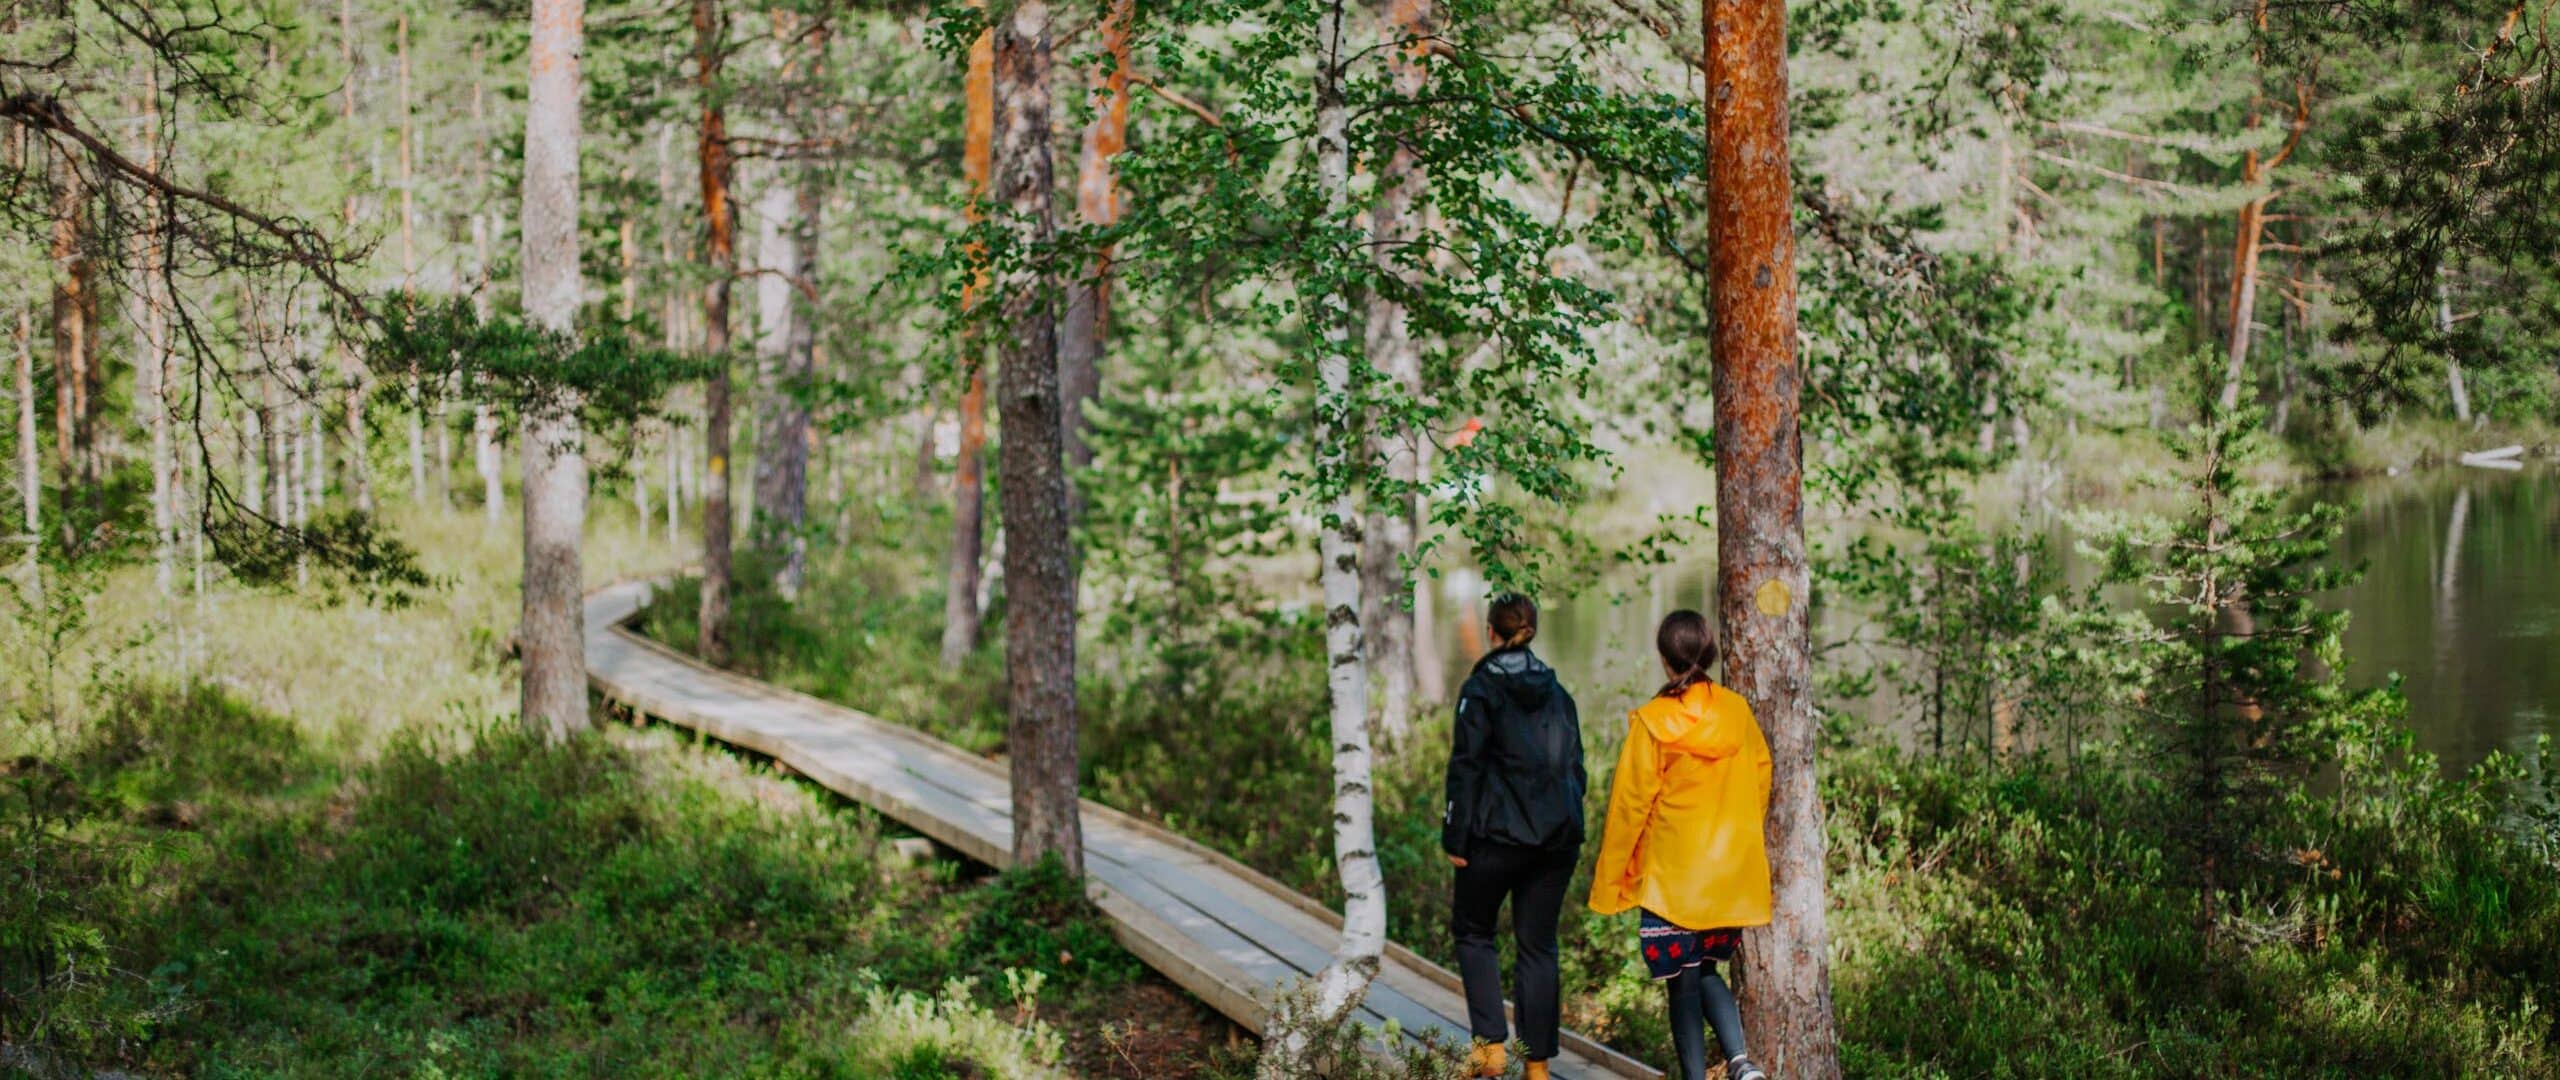 Two persons walking in nature on a wooden trail.